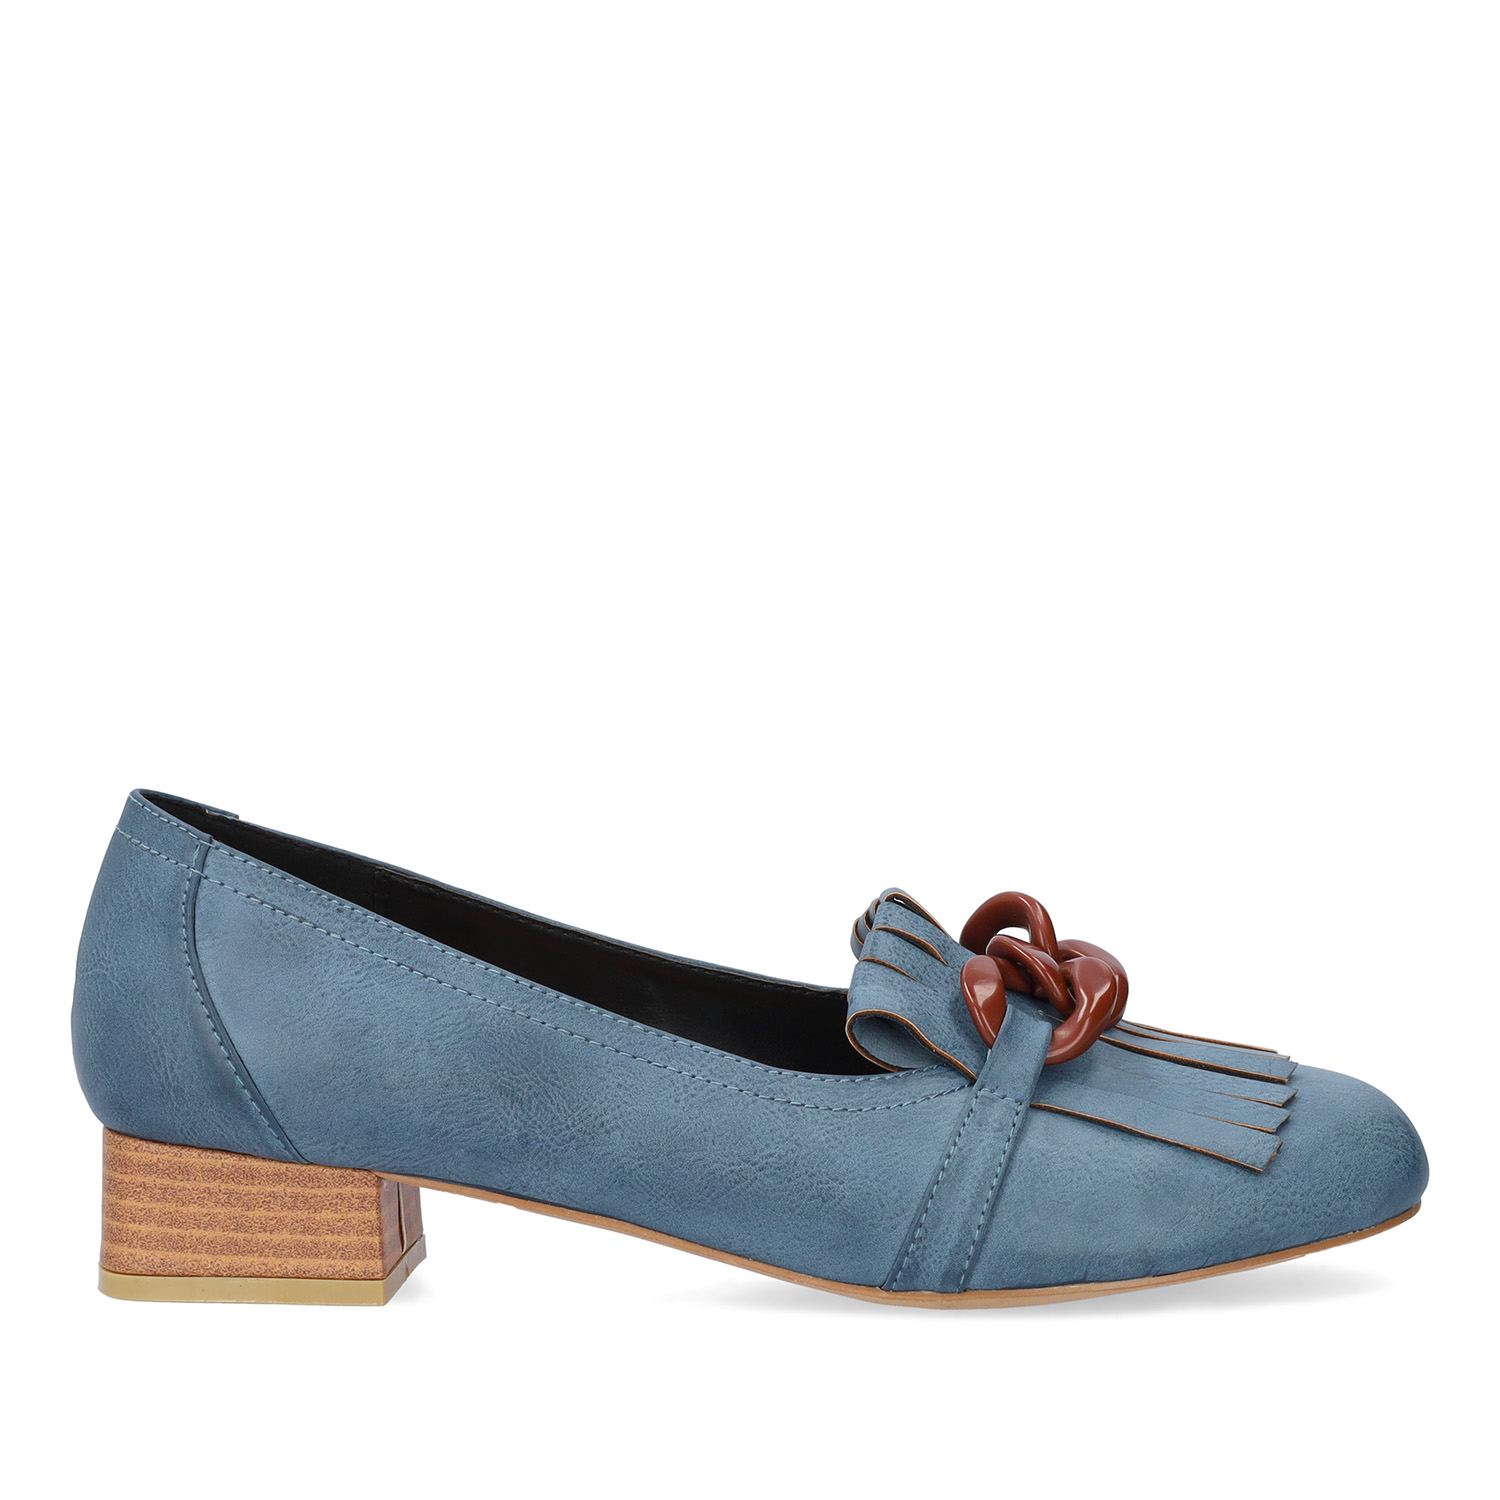 Blue embossed faux leather shoes